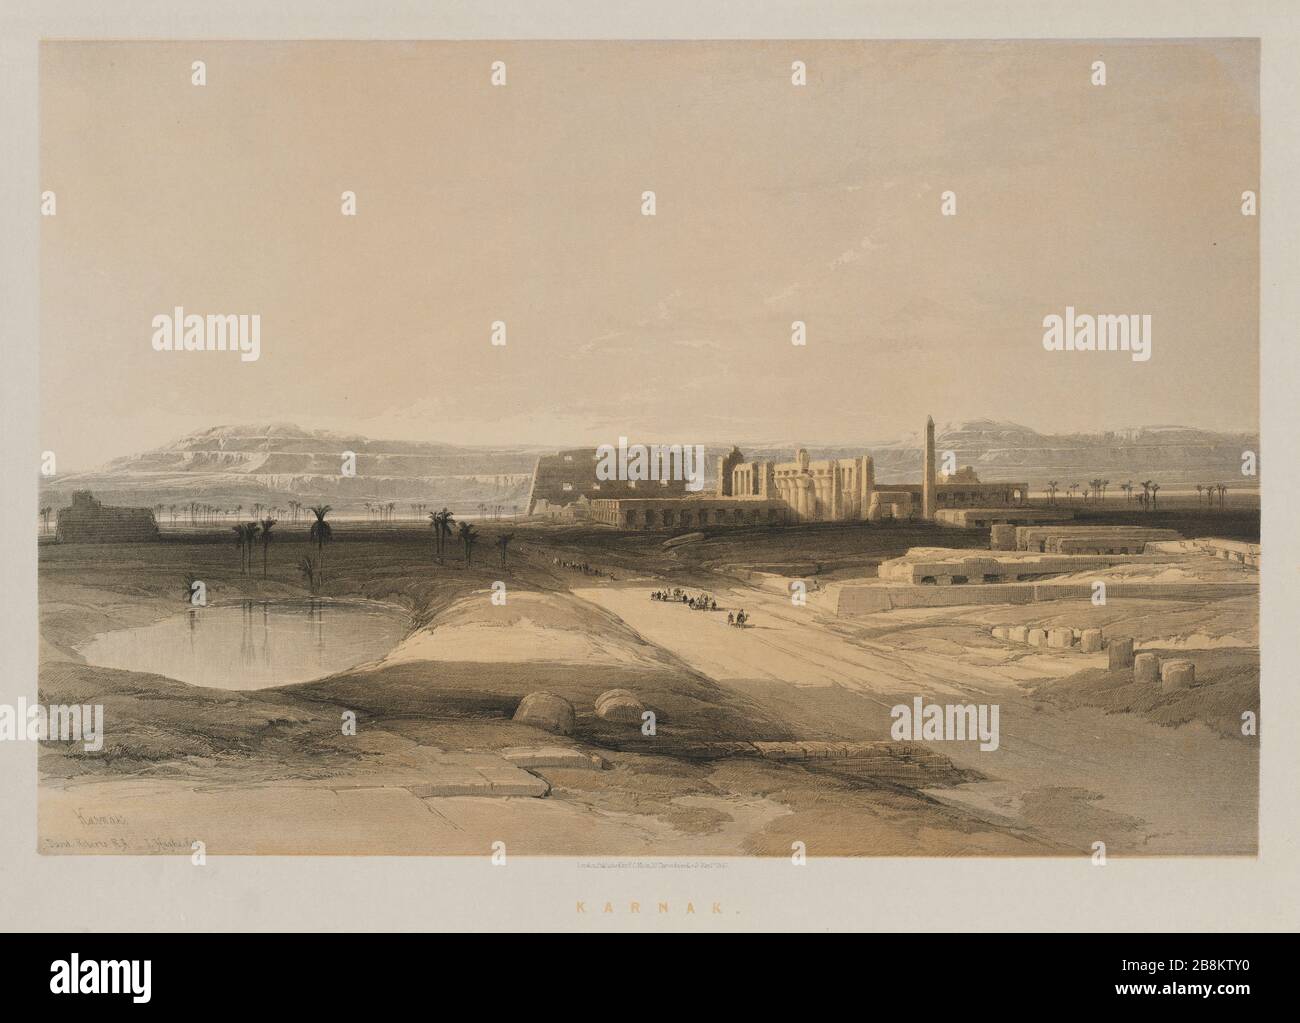 General View of Karnak, Egypt from Egypt and Nubia, Volume II: Karnak, 1847. Louis Haghe (British, 1806-1885), F.G.Moon, 20 Threadneedle Street, London, after David Roberts (British, 1796-1864). Color lithograph; sheet: 60.3 x 43.6 cm (23 3/4 x 17 3/16 in.); image: 48.8 x 32.7 cm (19 3/16 x 12 7/8 in.). Stock Photo